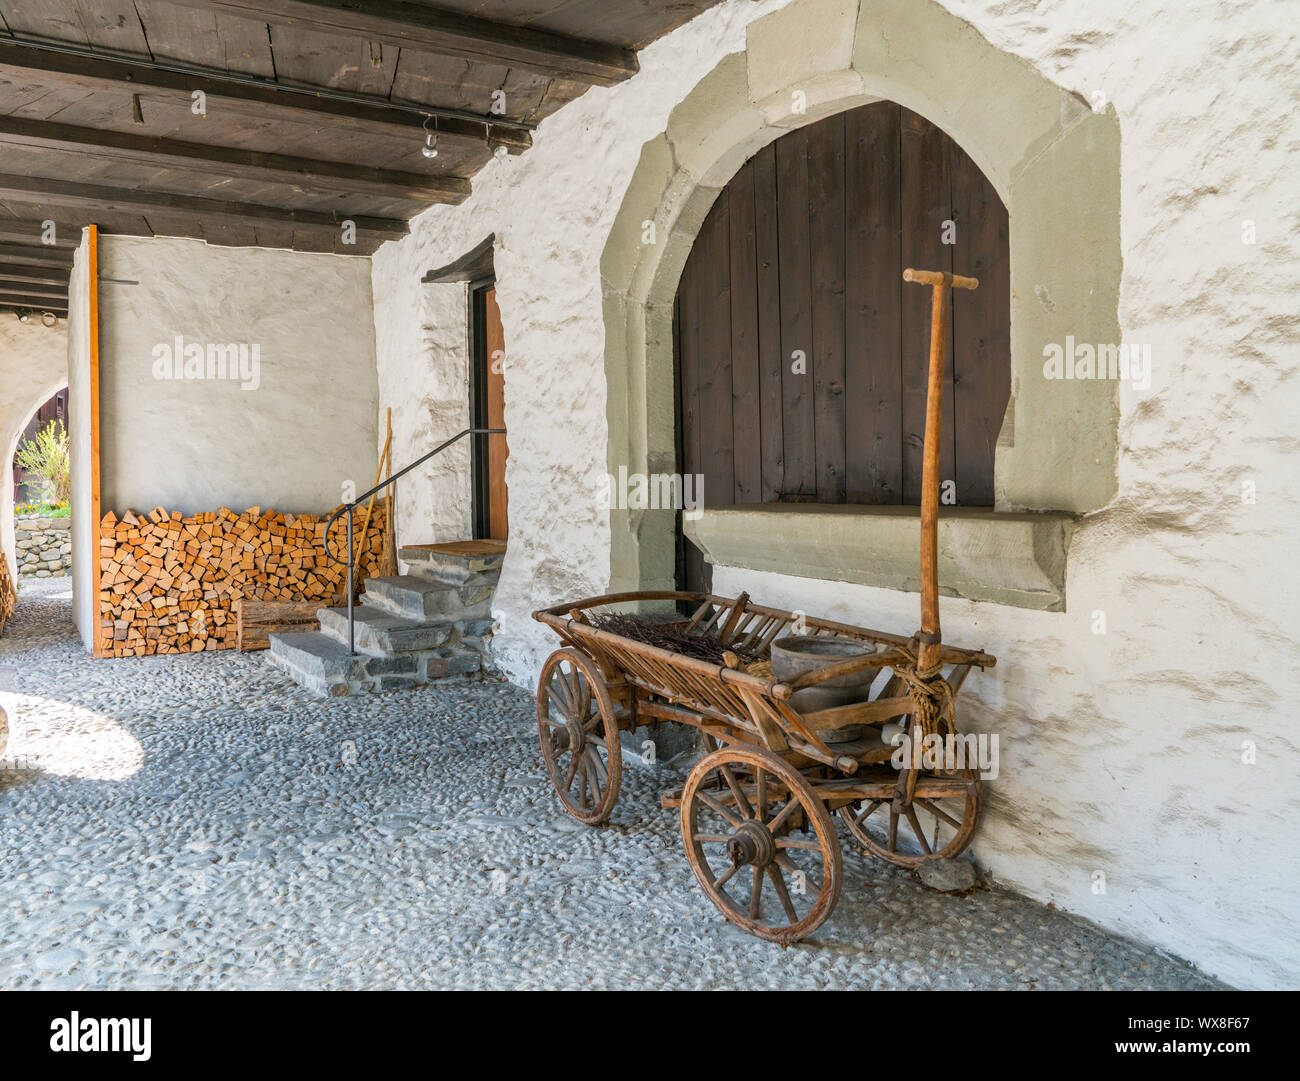 Werdenberg, SG / Switzerland - March 31, 2019: Werdenberg village with historic and traditional buil Stock Photo